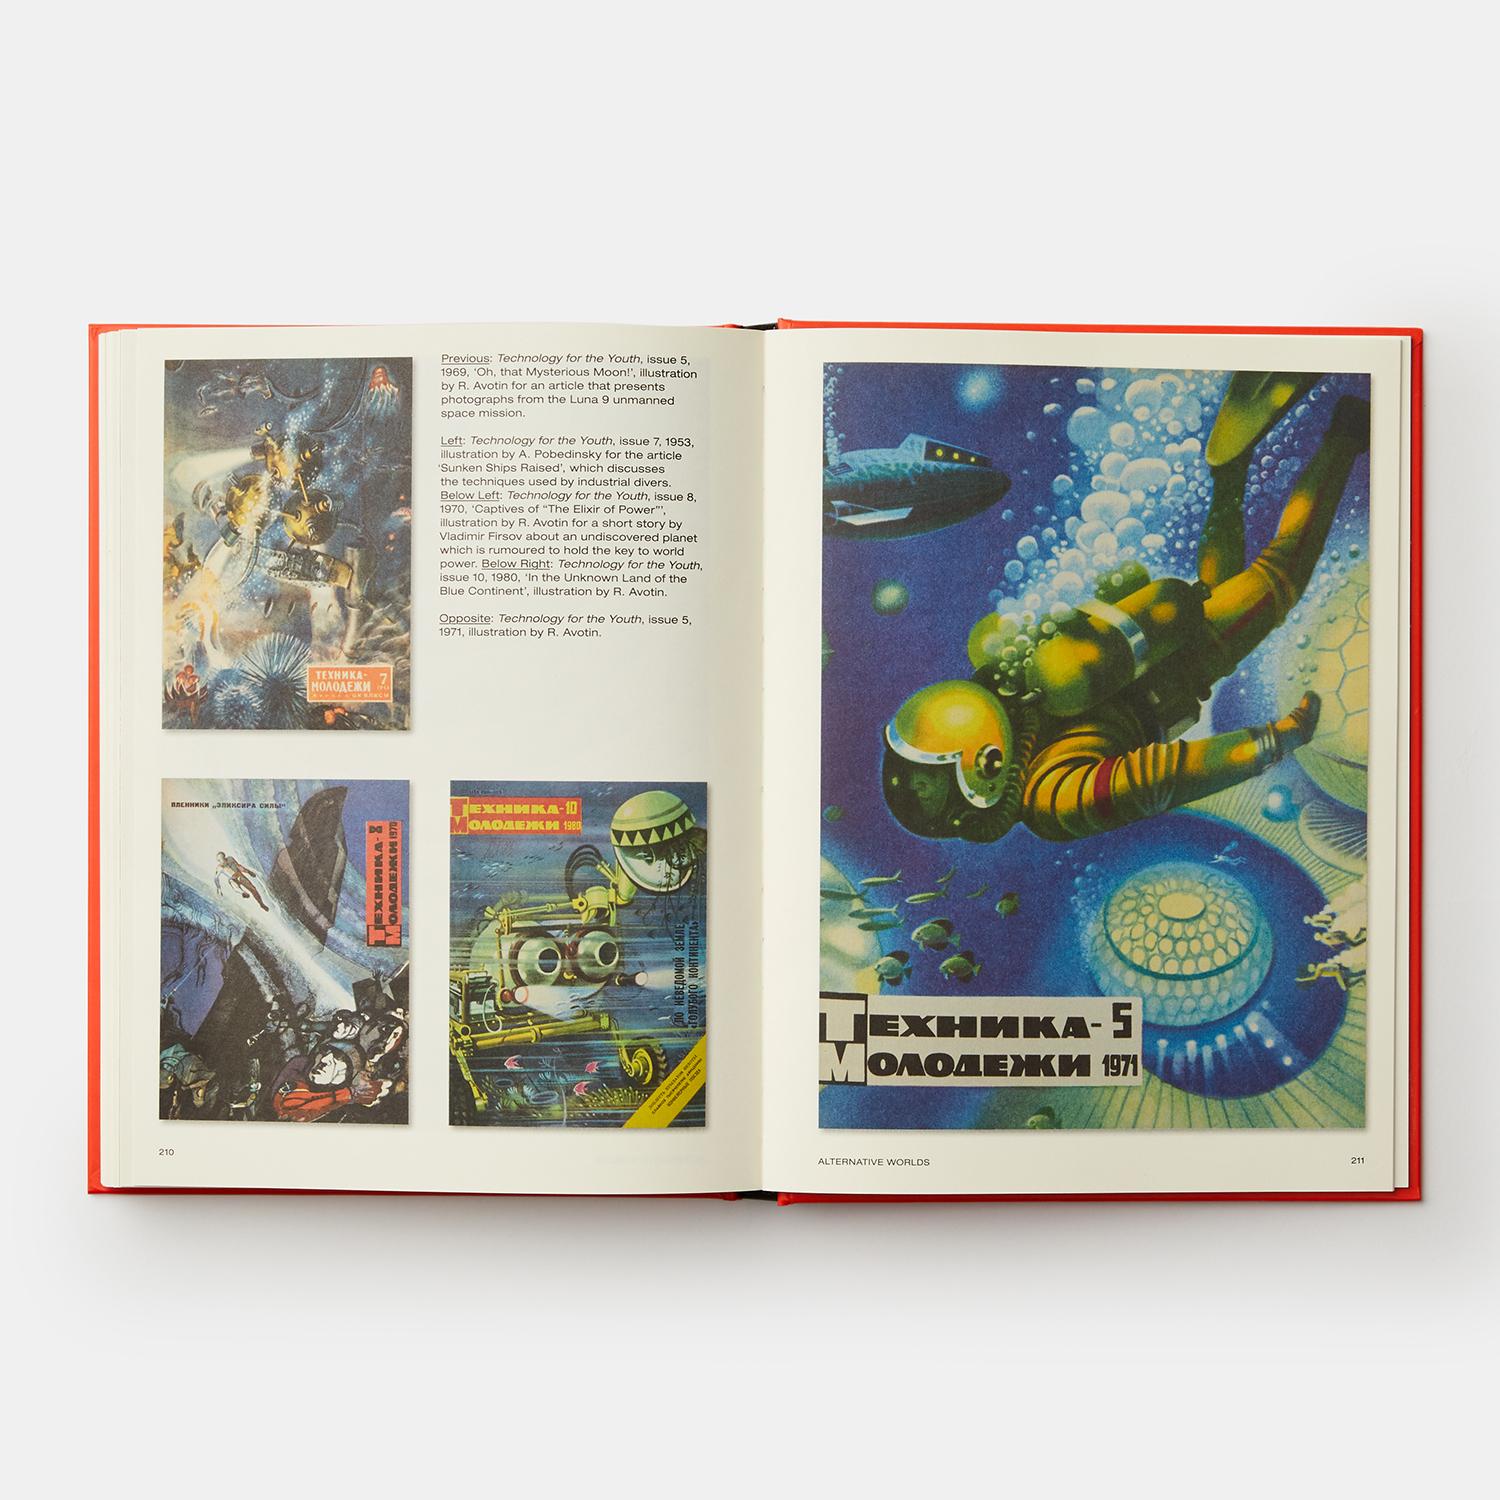 Soviet Space Graphics - Cosmic Visions from the USSR 2